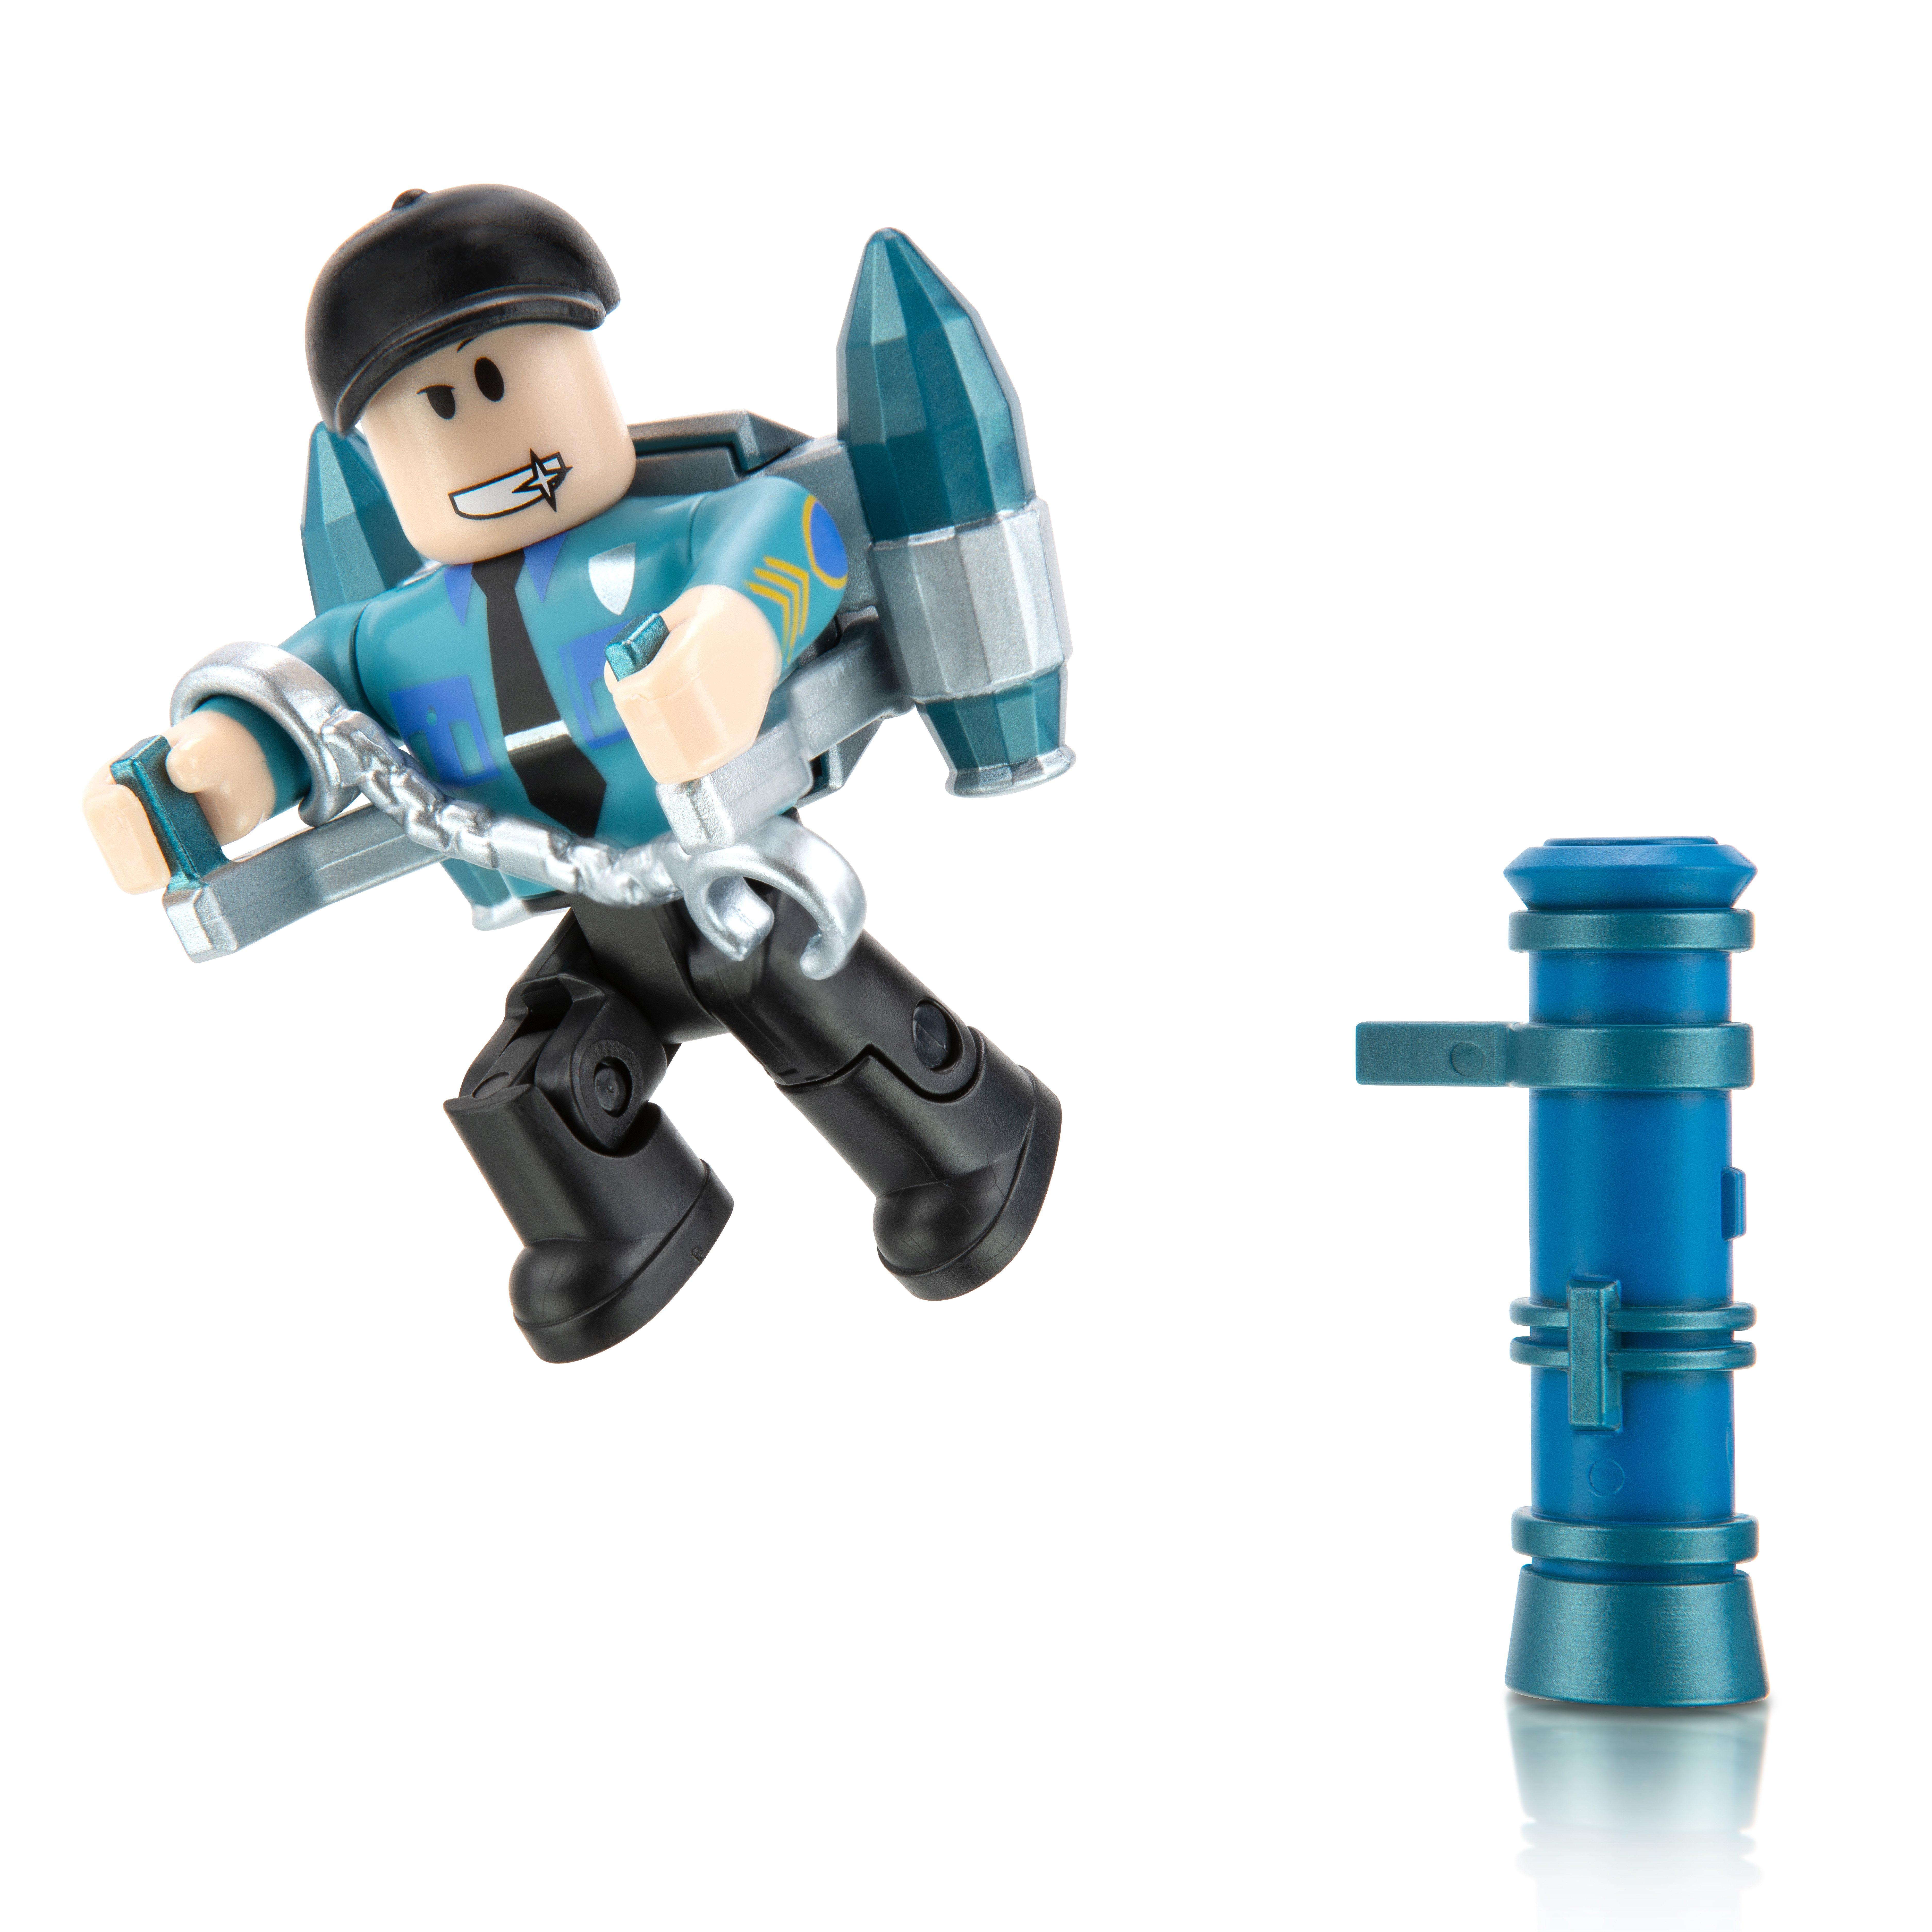 Roblox Action Collection Single Figure Pack Includes 1 Exclusive Virtual Item Styles May Vary Gamestop - roblox mega pack